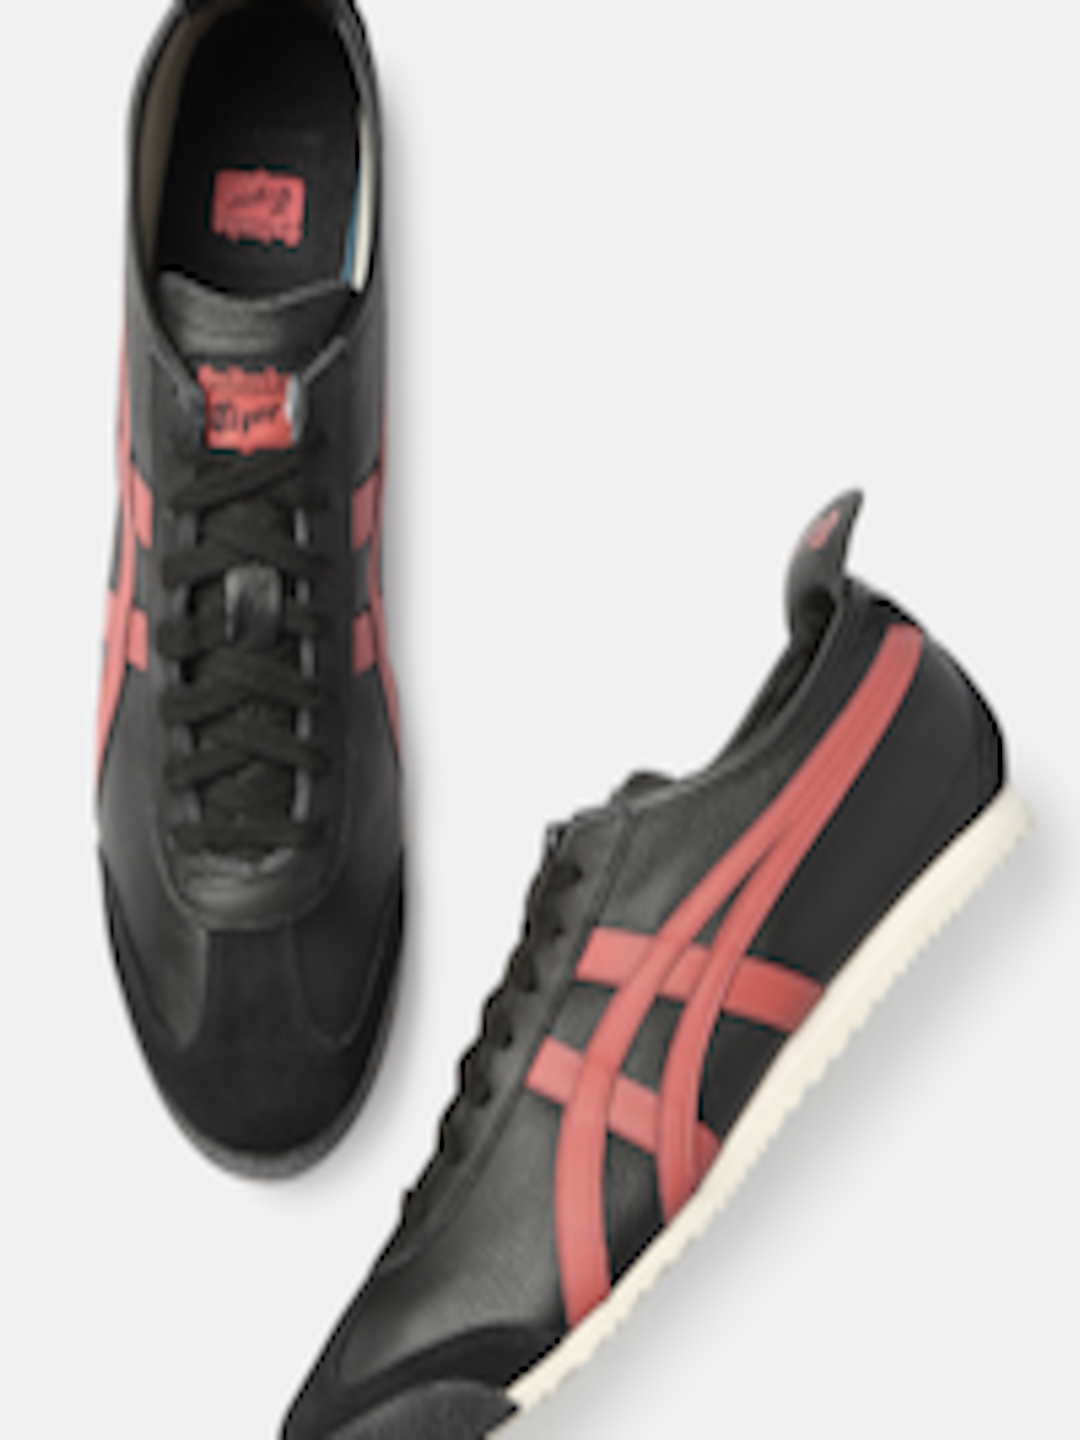 Buy Onitsuka Tiger Unisex Black Red Leather Sneakers Mexico 66 - Casual